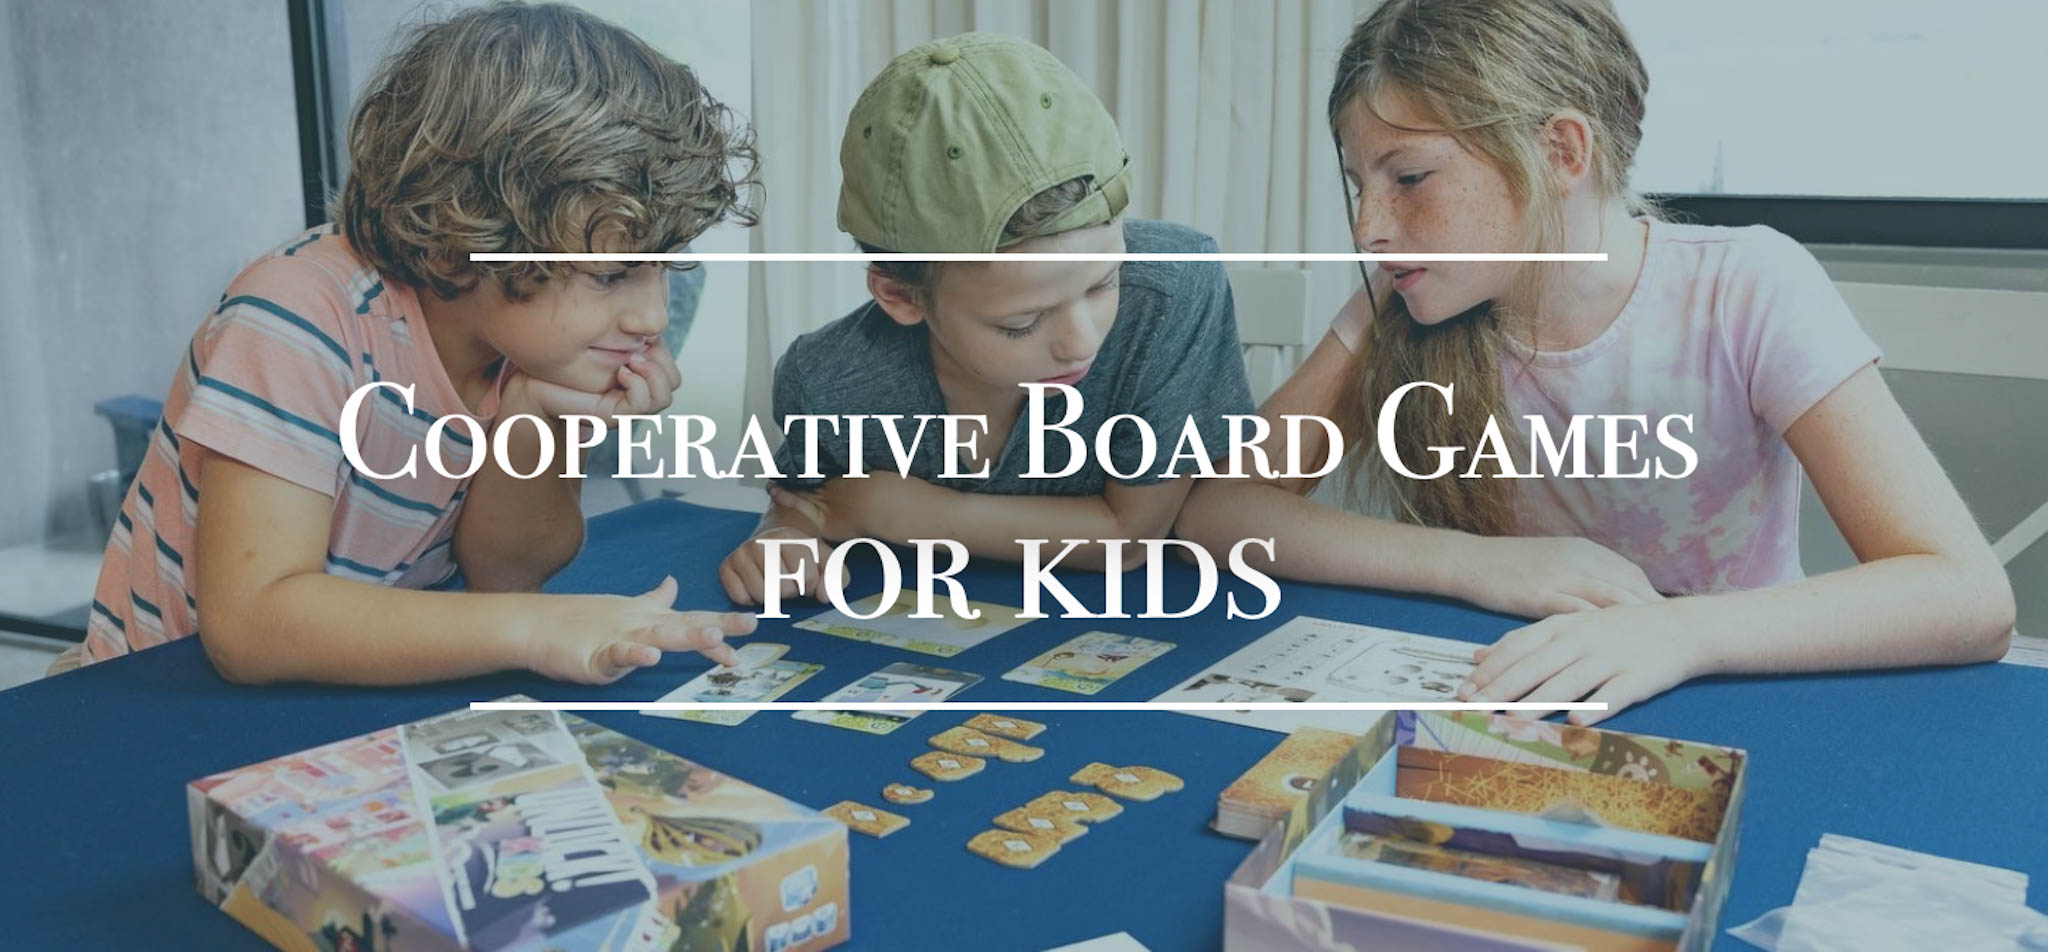 Free Online Board Games for Kids: Play Classic Children's Board